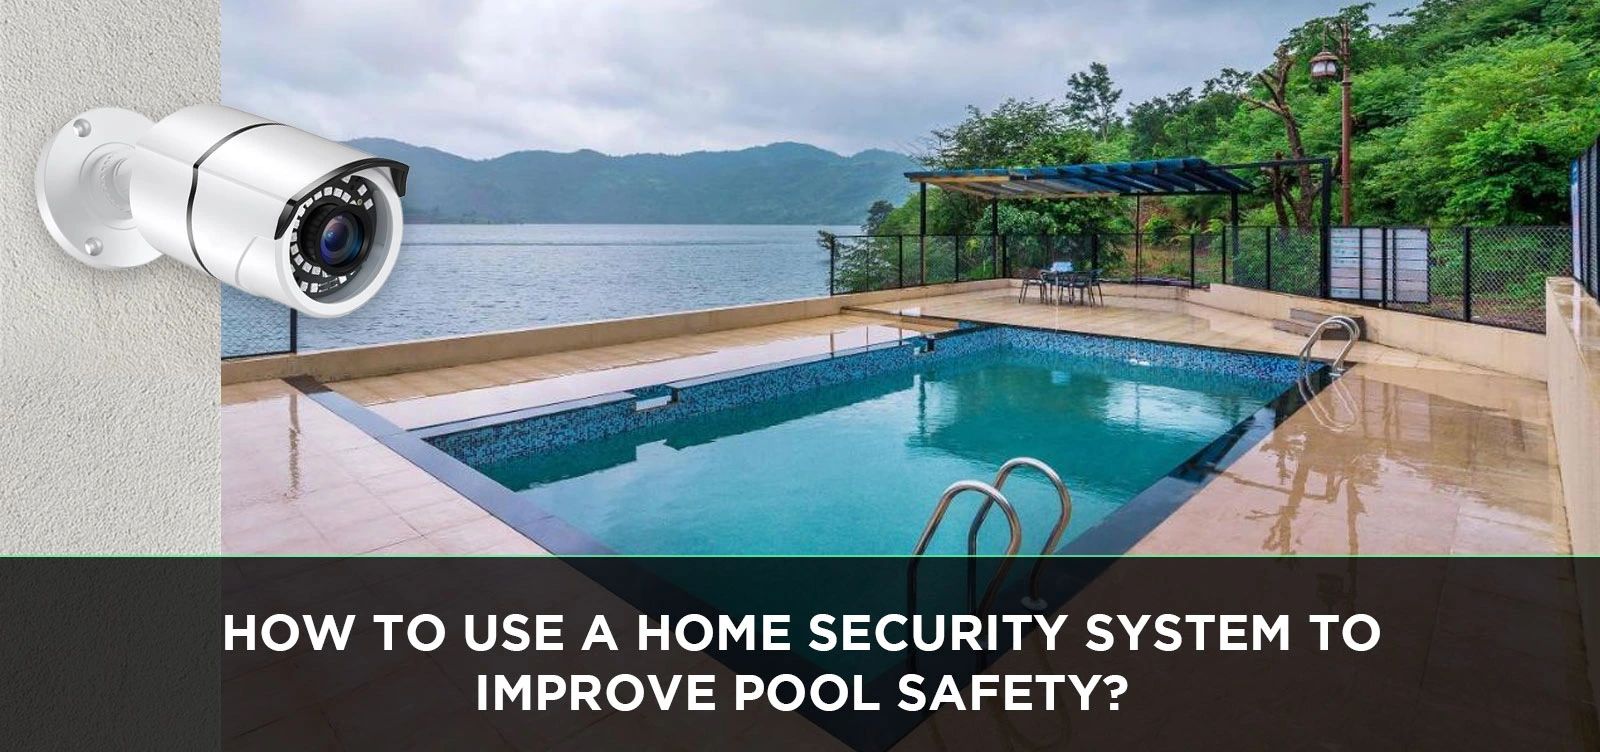 Home Security System to Improve Pool Safety